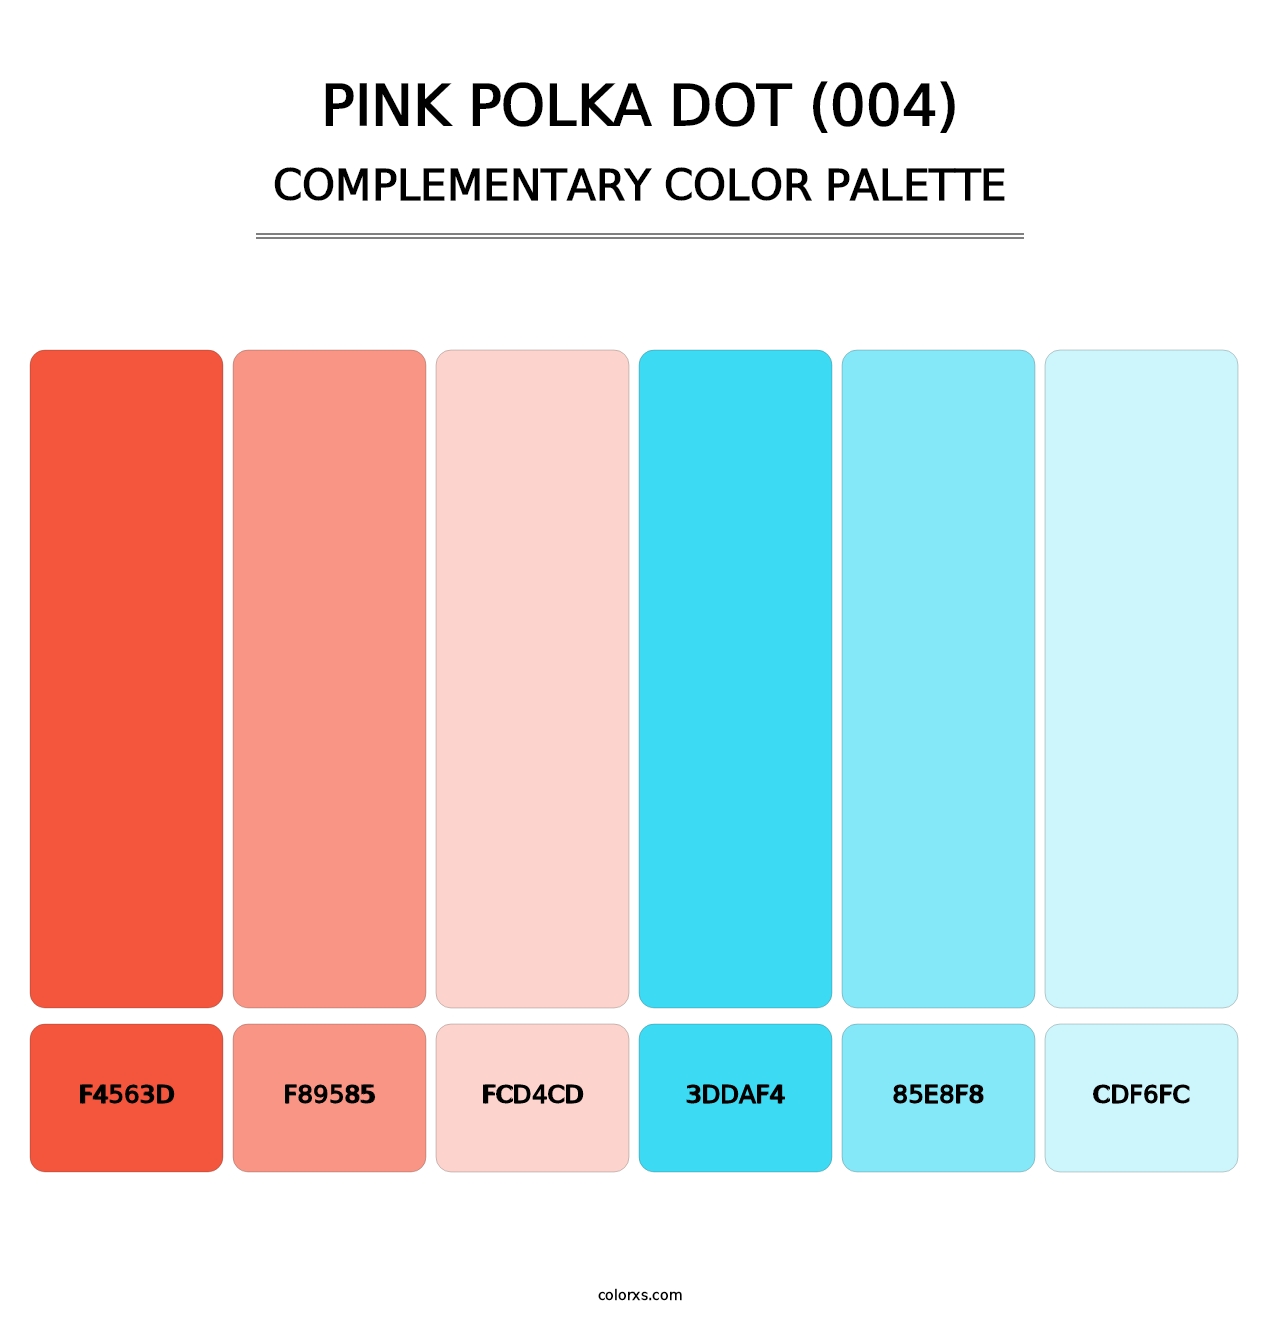 Pink Polka Dot (004) - Complementary Color Palette